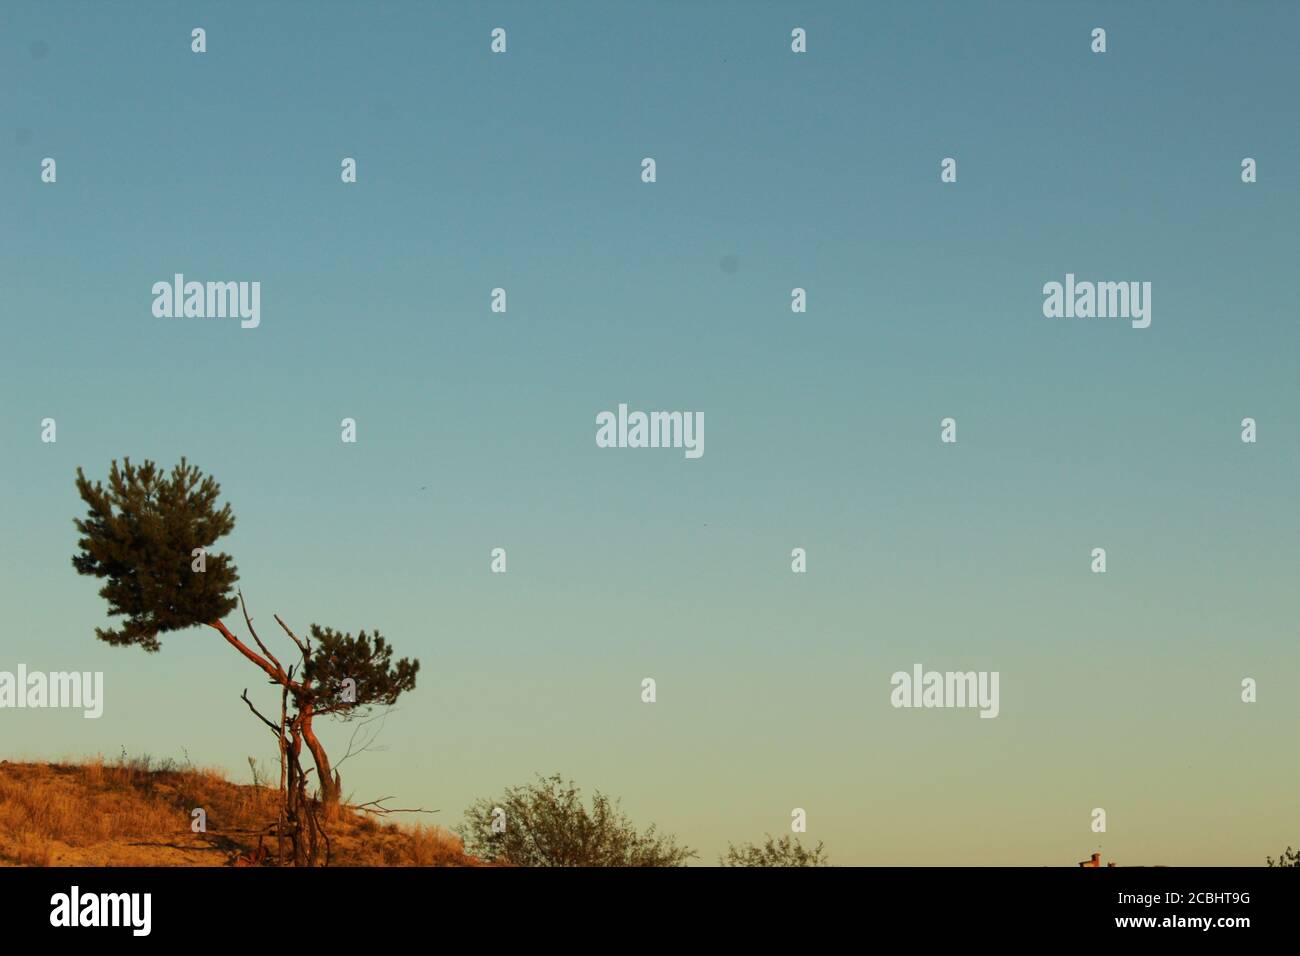 a lone solitary tree grows on the sand against a blue sky savanna landscape for a postcard picture Stock Photo